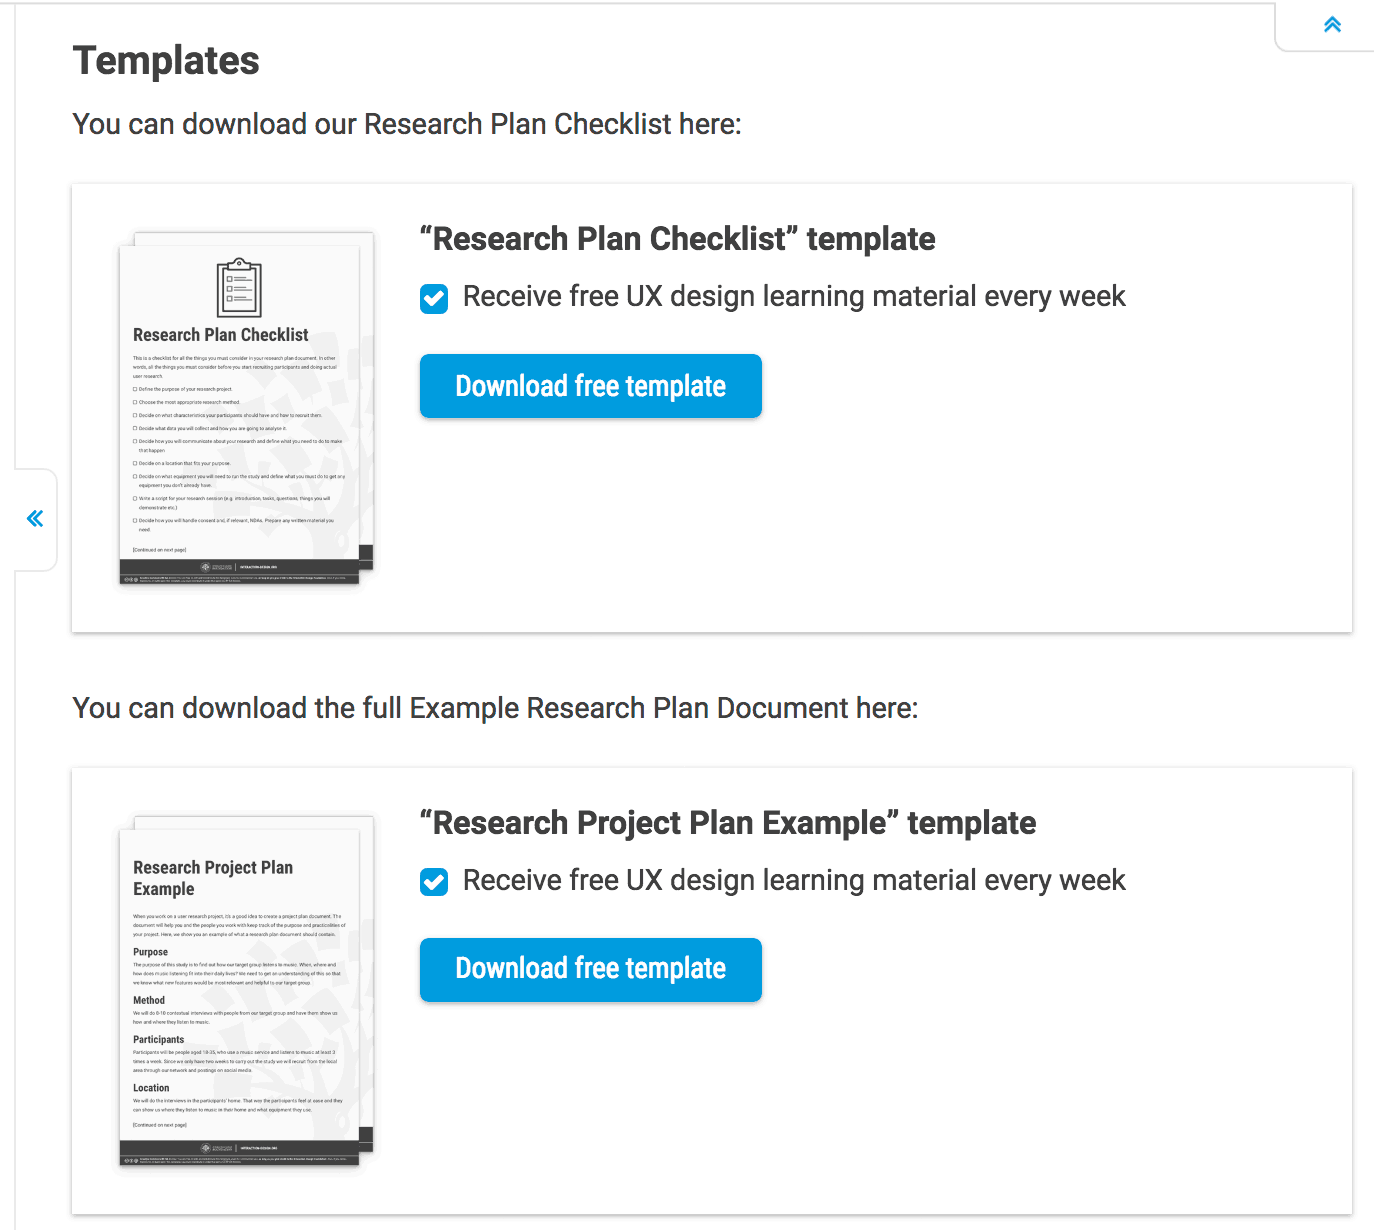 Templates for planning research projects.